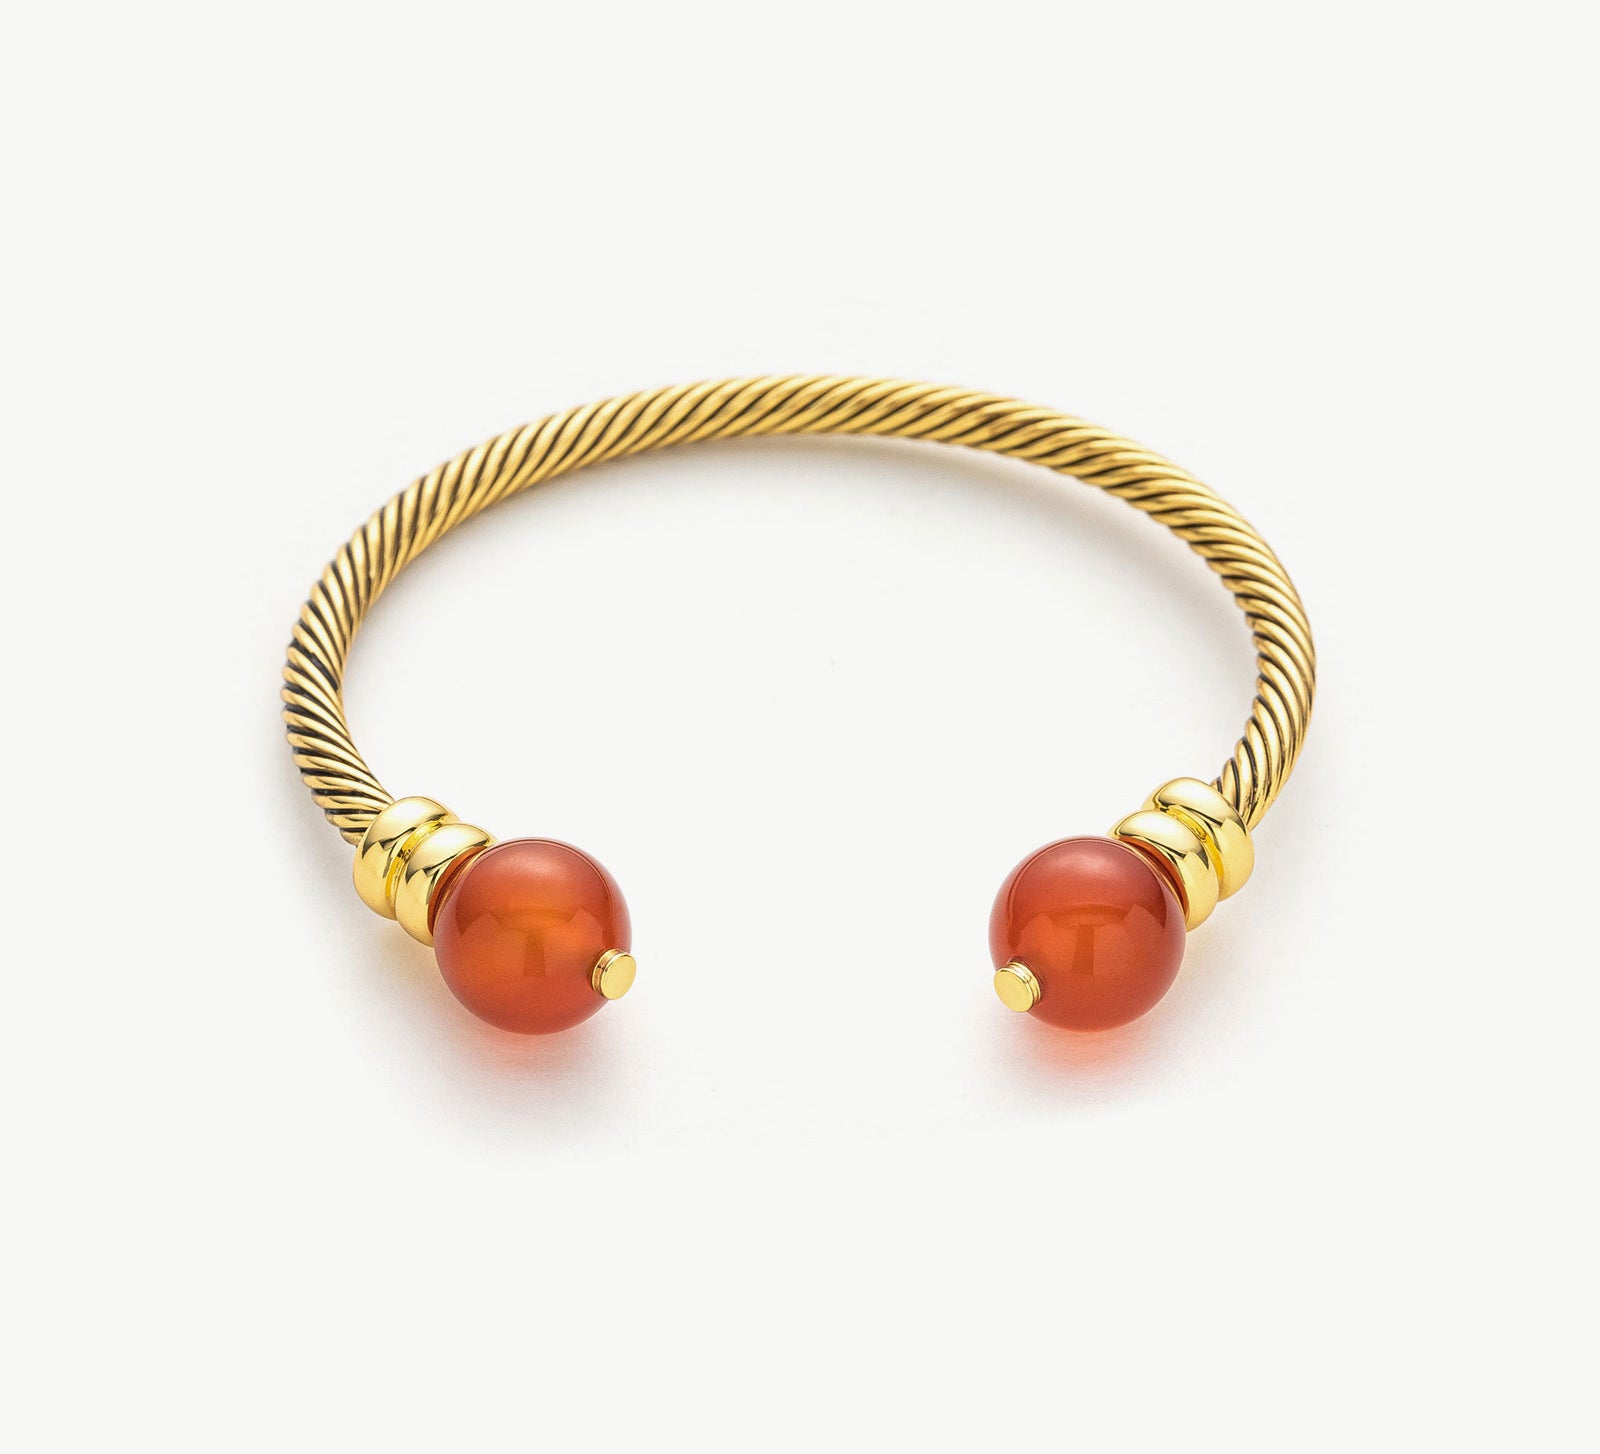 Agate Bracelet in Gold with Red Gemstones, exuding timeless elegance with a vintage-inspired design, this bracelet features rich red agate gemstones set in a delicate gold setting for a luxurious and refined accessory